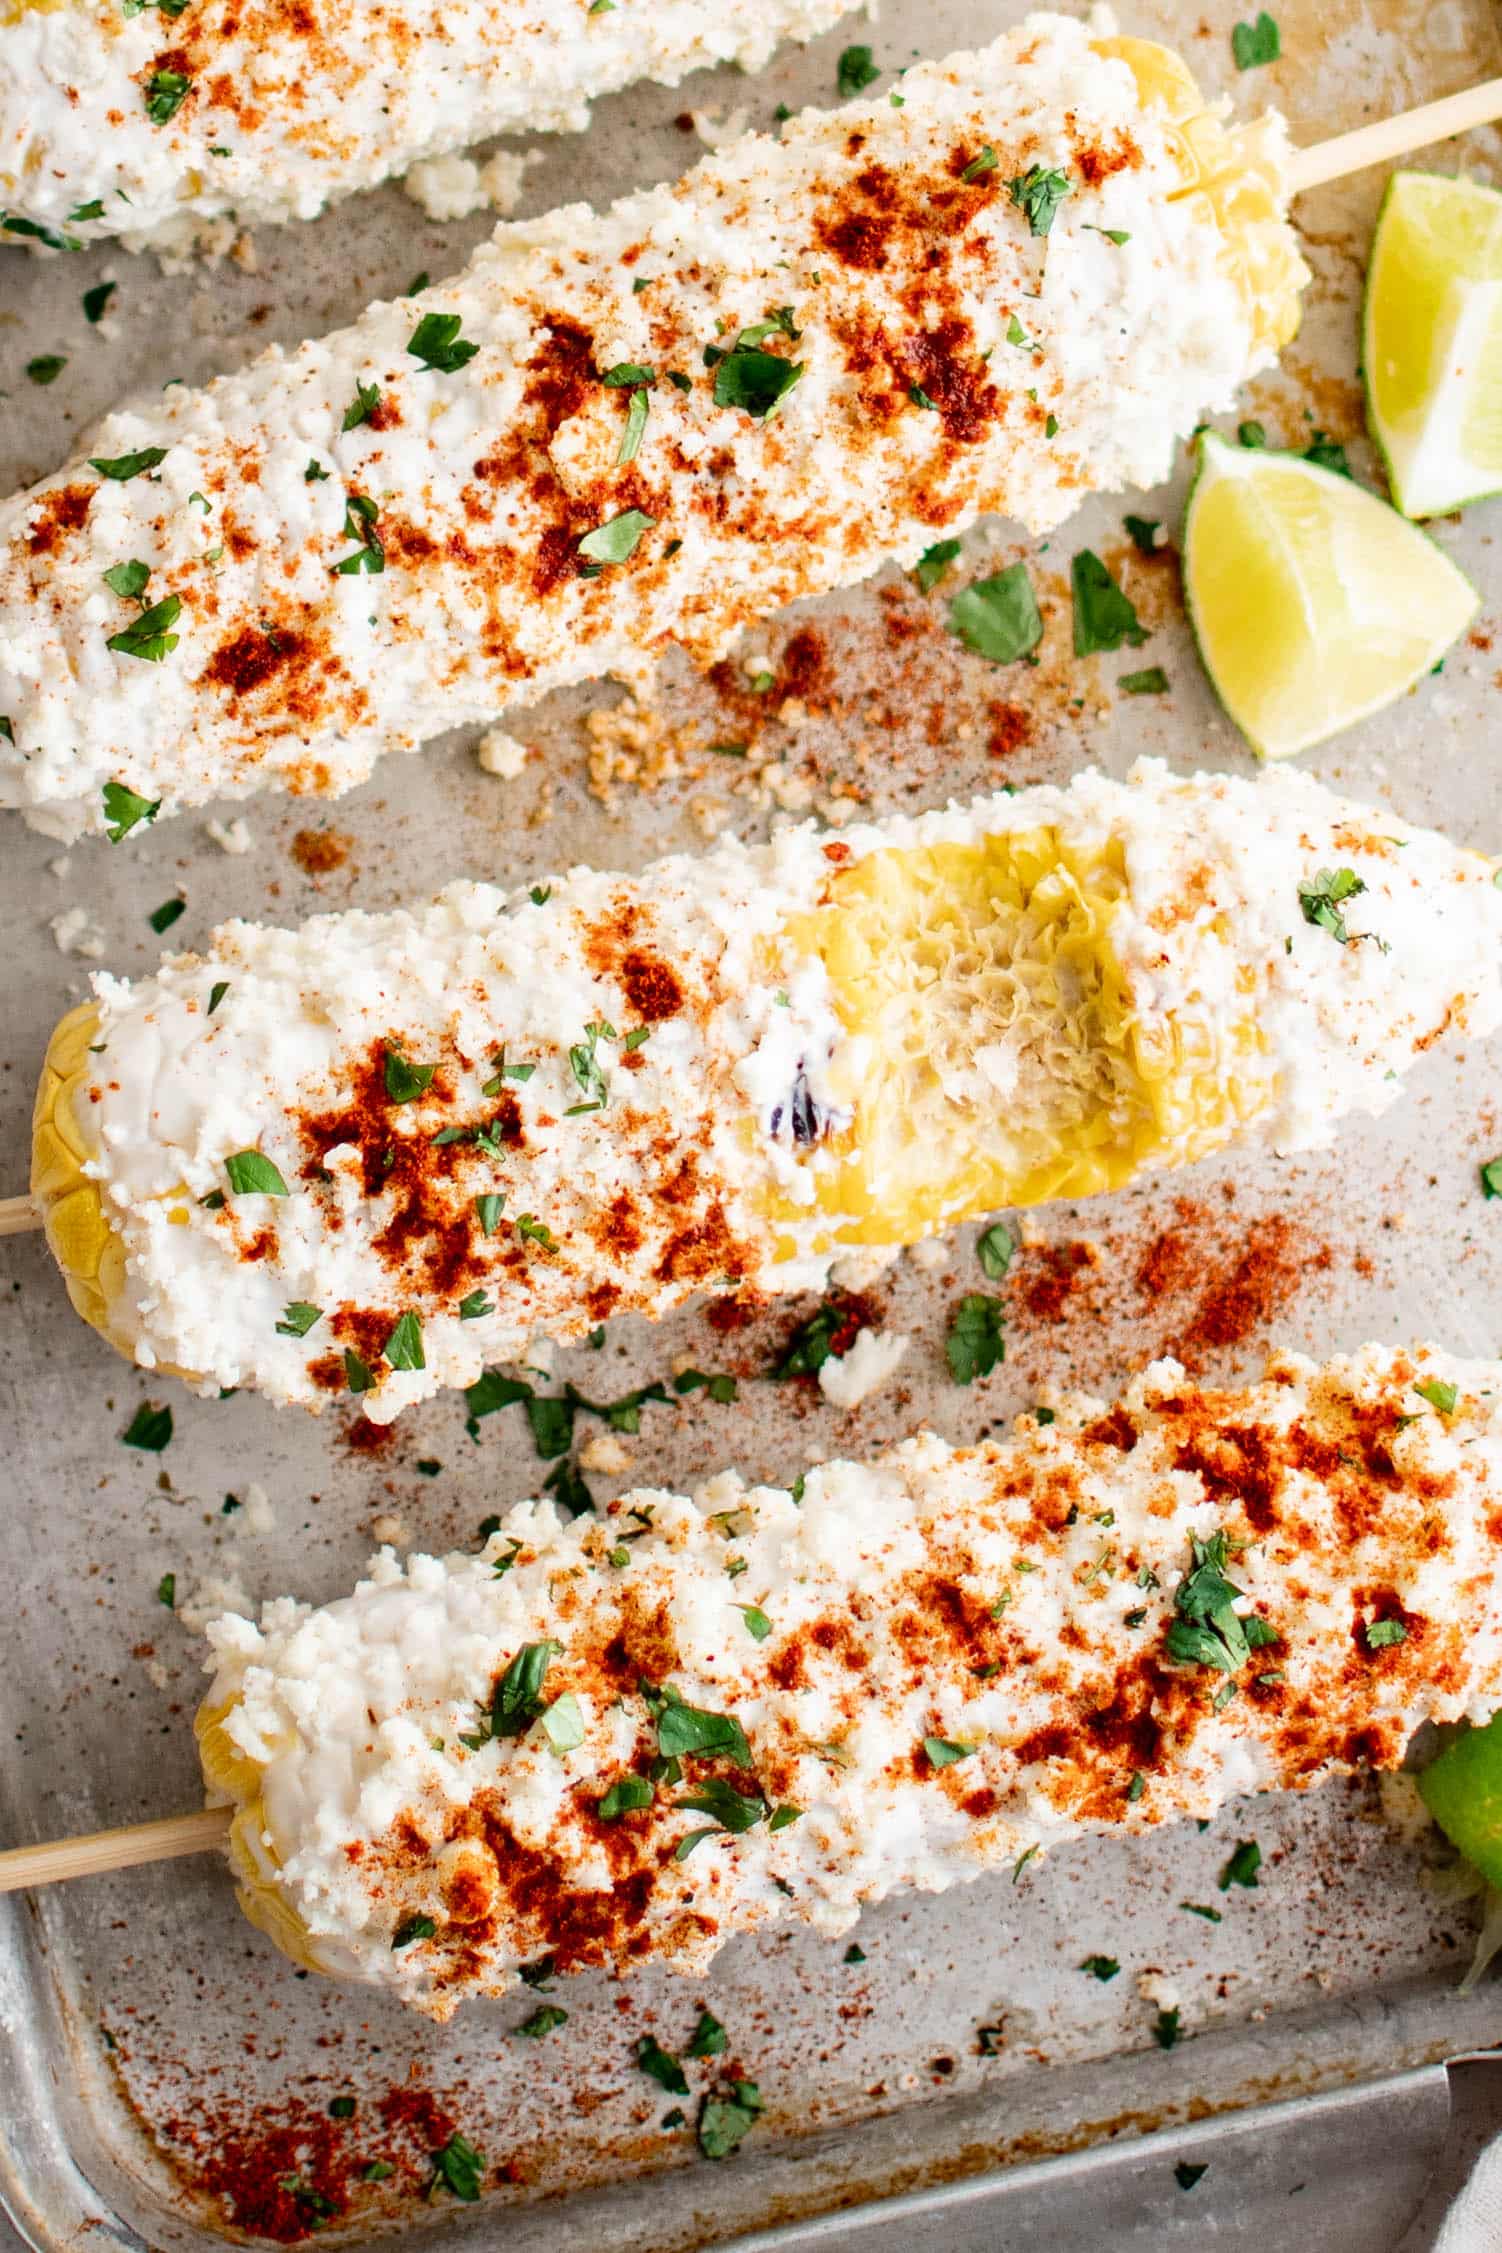 Three prepared elote - the middle with a bite taken out - on a baking sheet and garnished with paprika and chili powder, fresh cilantro, and lime wedges.